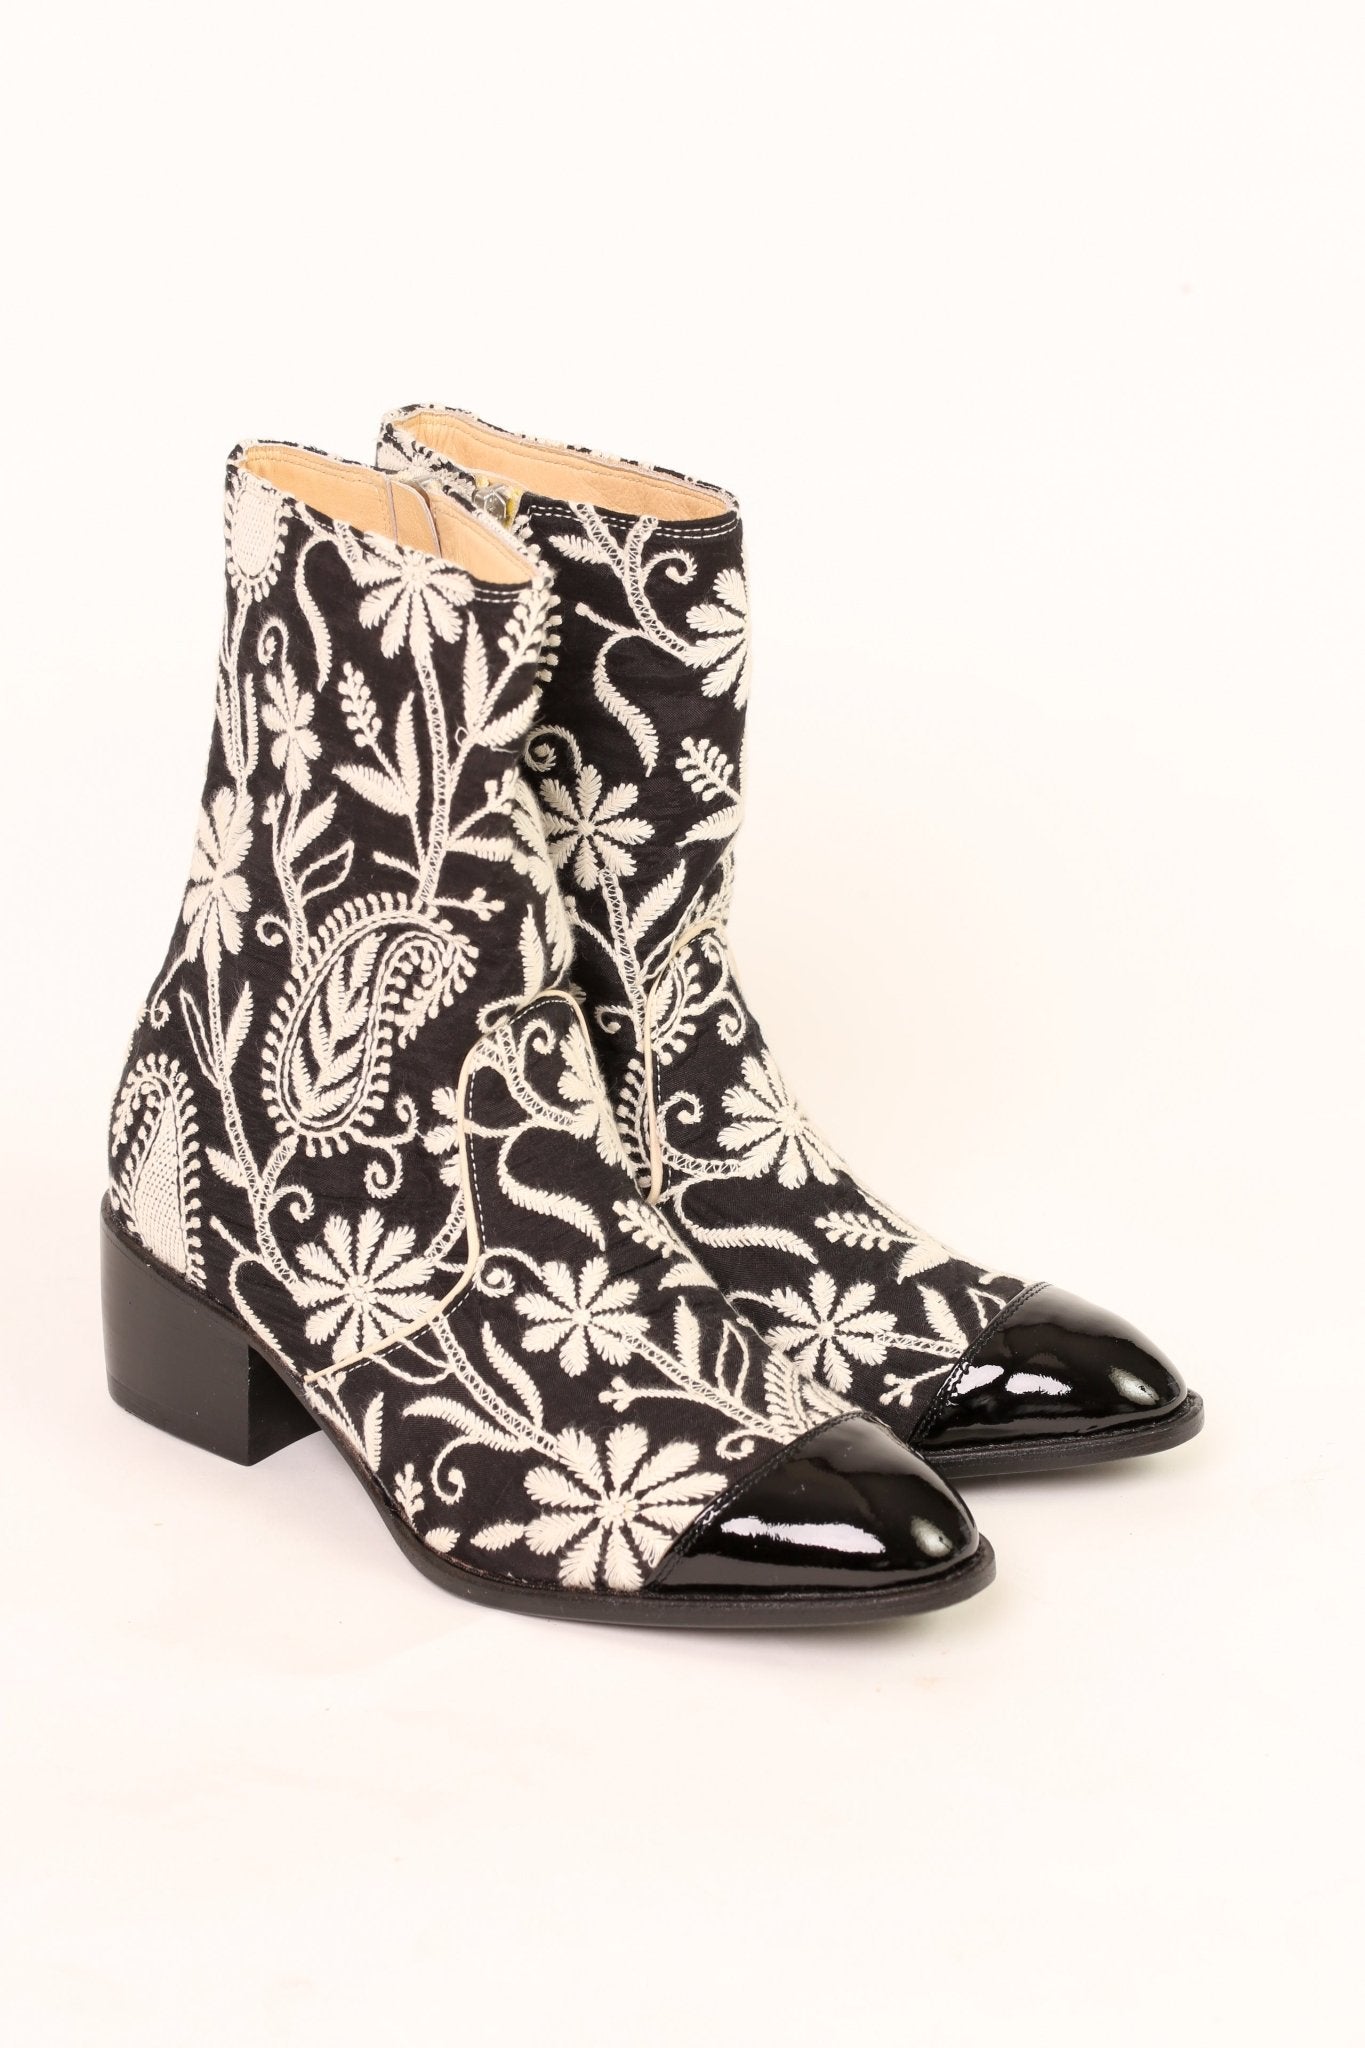 EMBROIDERED SILK PAISLEY BOOTS OWEN